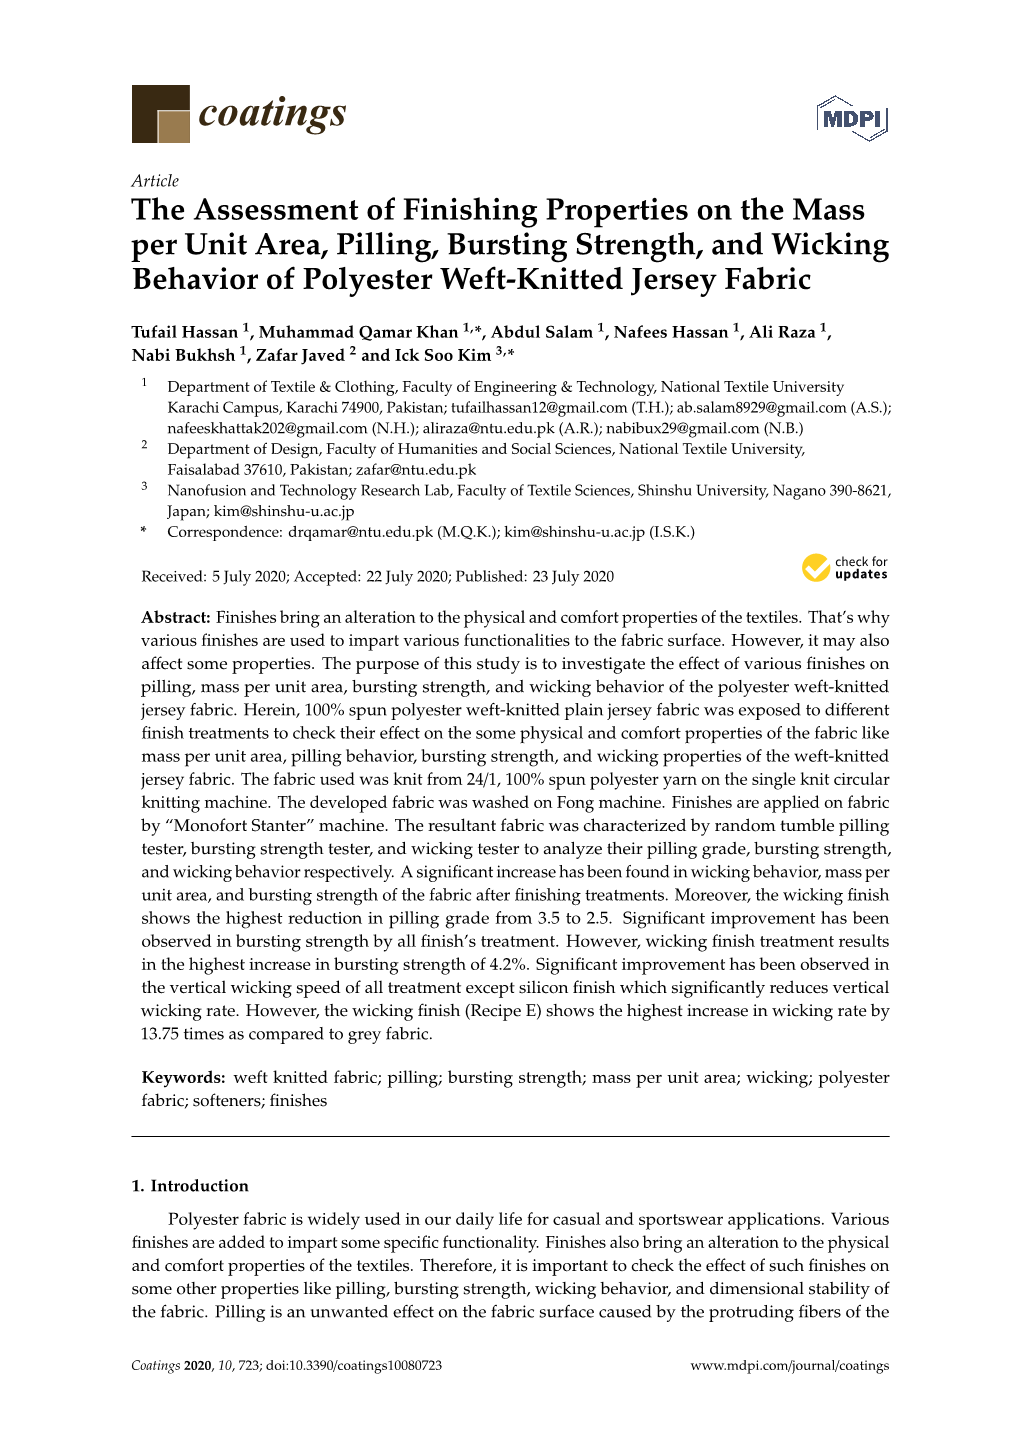 The Assessment of Finishing Properties on the Mass Per Unit Area, Pilling, Bursting Strength, and Wicking Behavior of Polyester Weft-Knitted Jersey Fabric